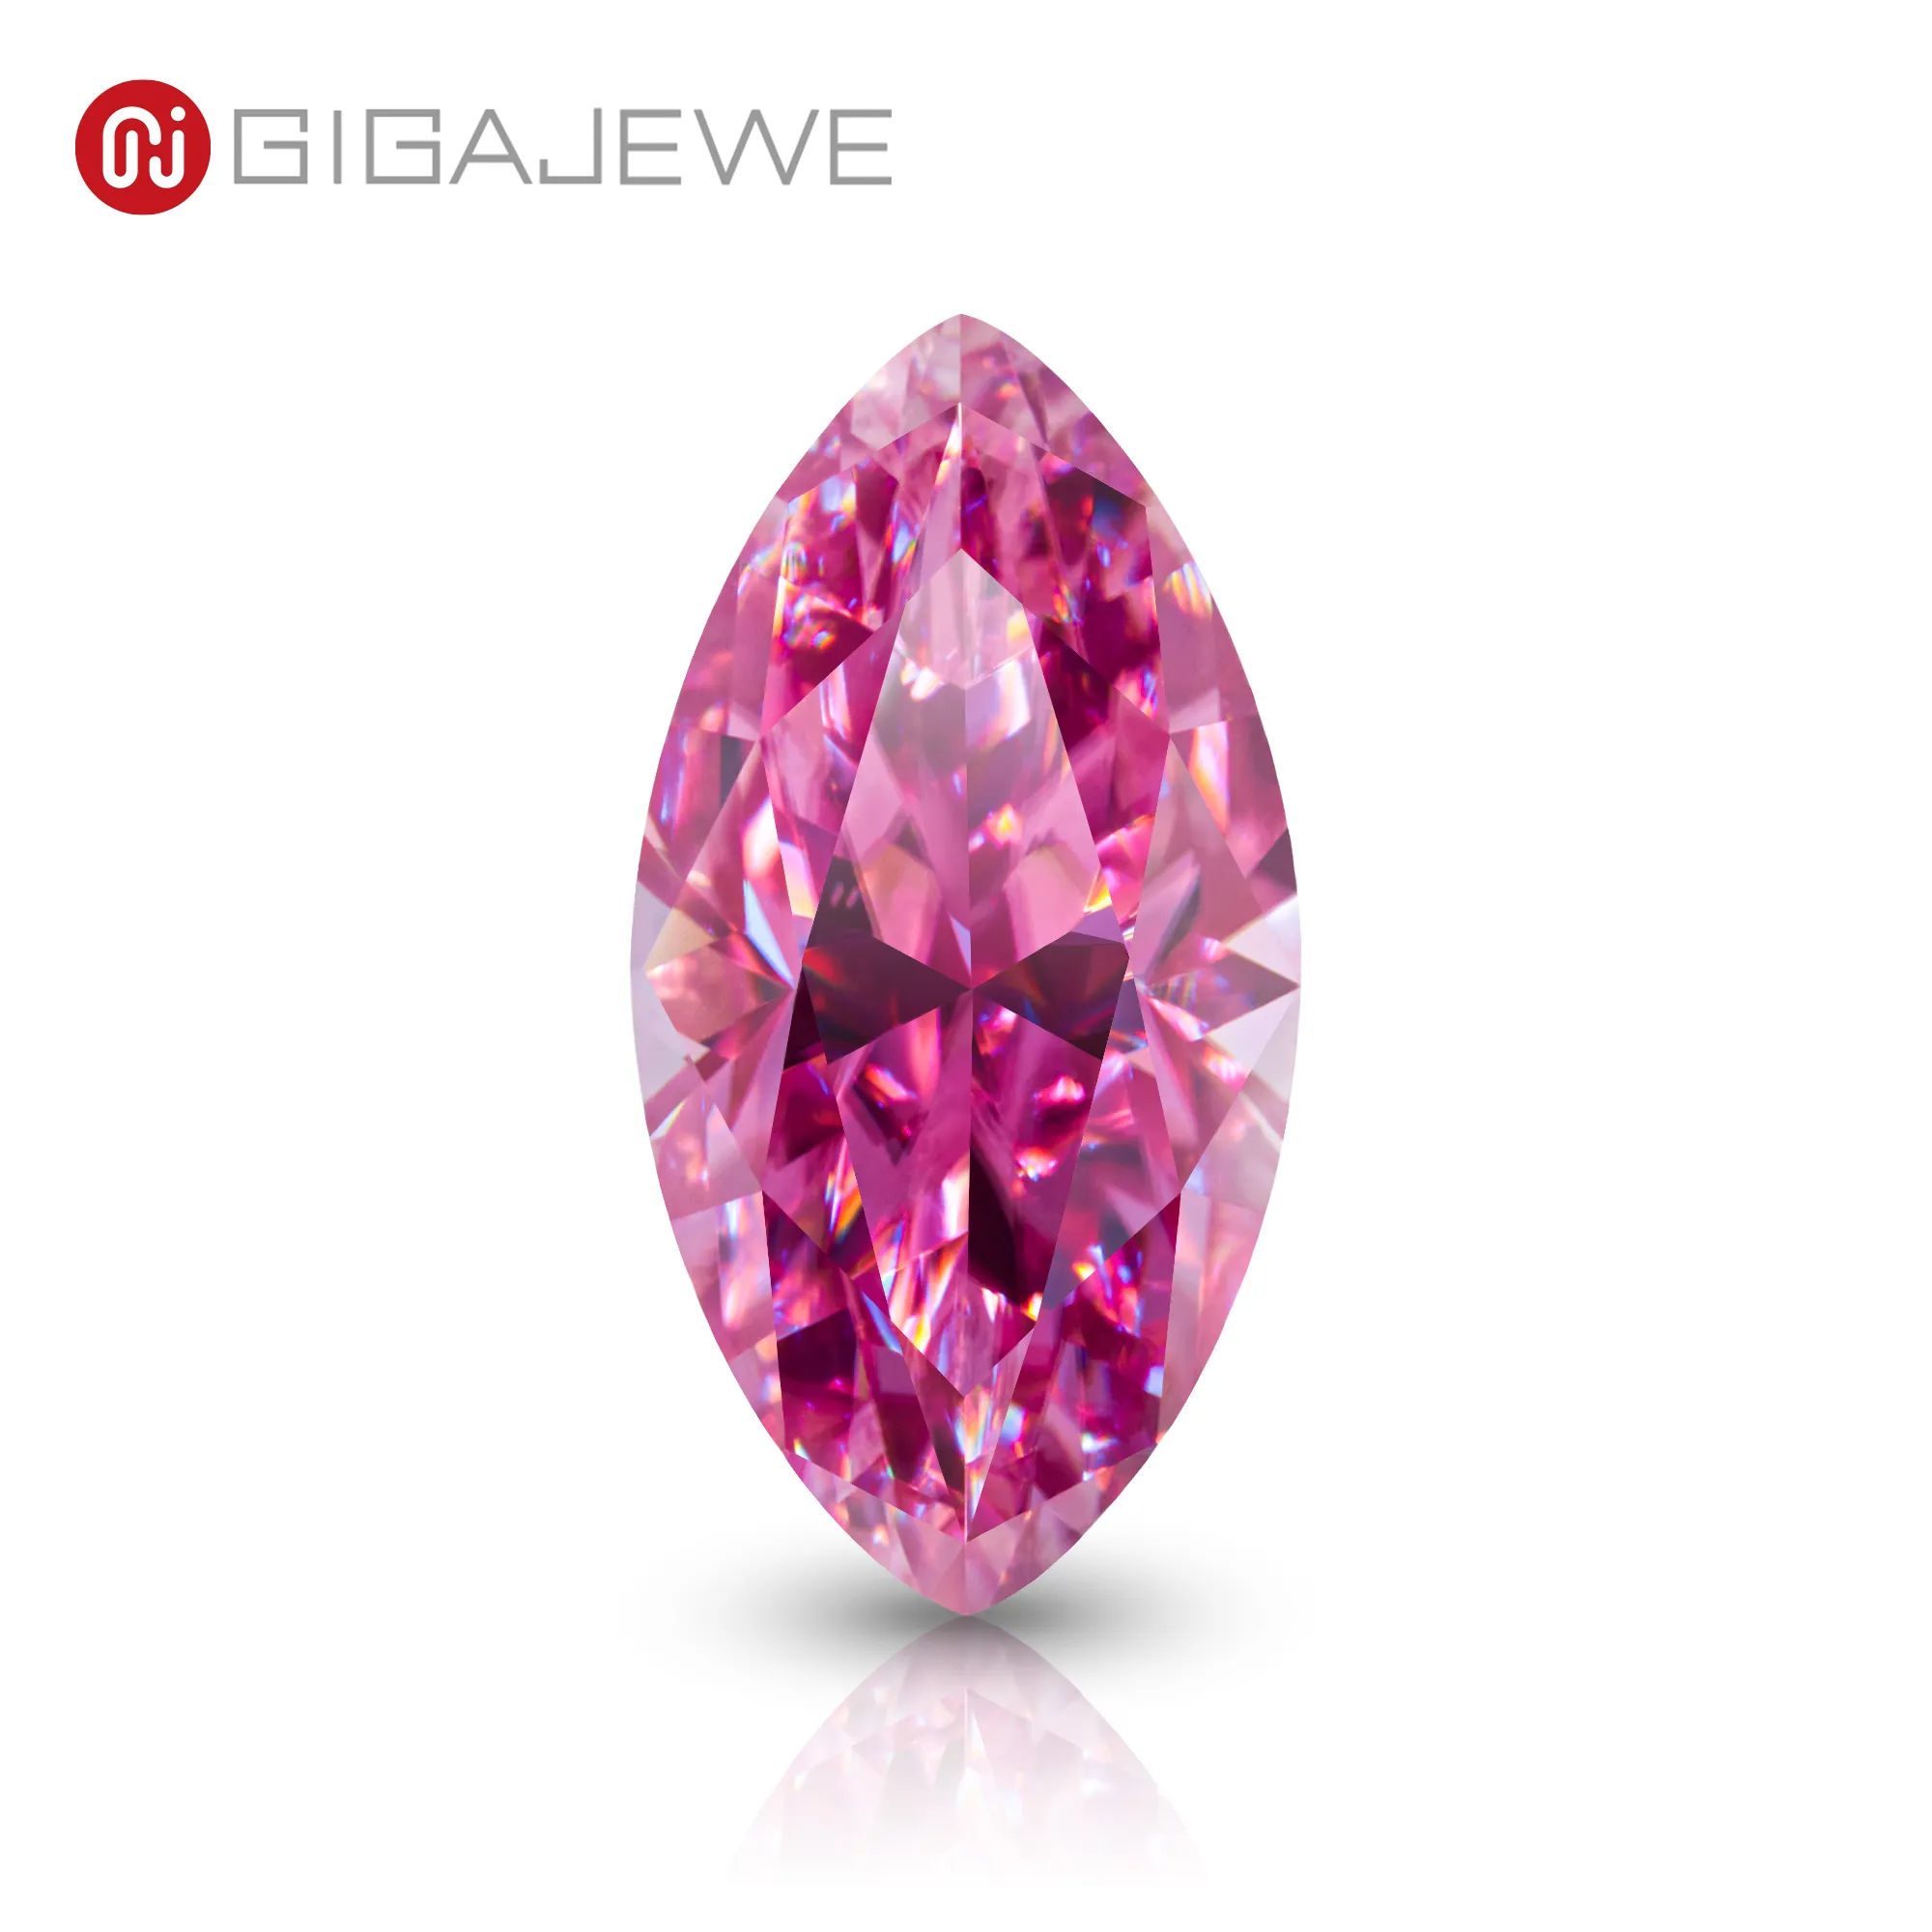 GIGAJEWE Pink Color Marquise cut VVS1 moissanite diamond 1-3ct for jewelry making